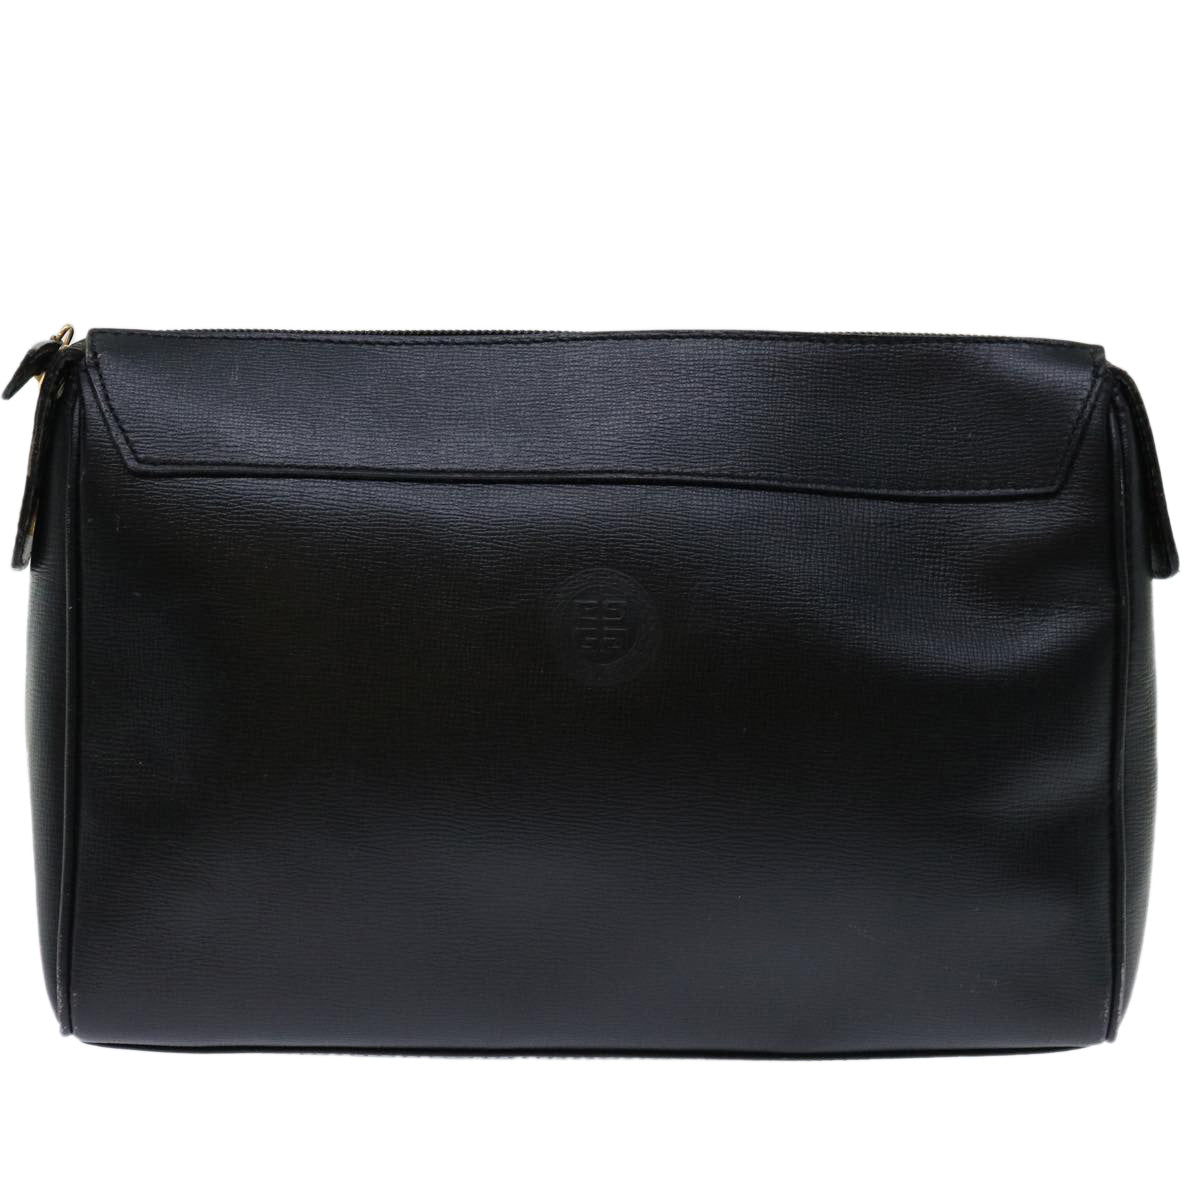 GIVENCHY Clutch Bag Leather Black Auth bs12942 - 0